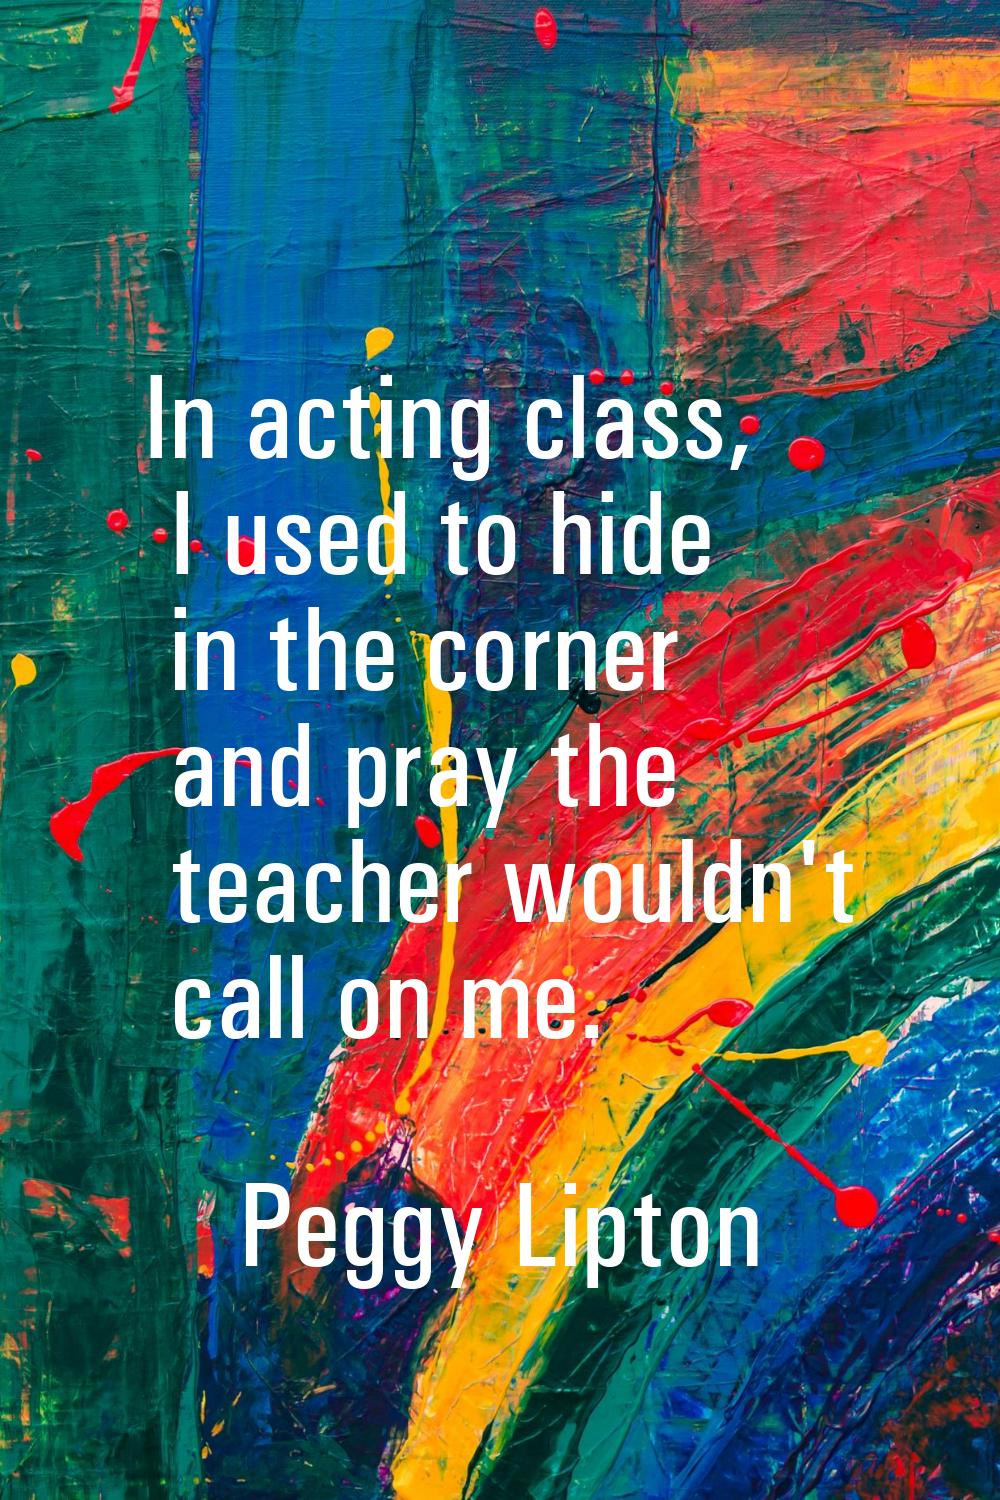 In acting class, I used to hide in the corner and pray the teacher wouldn't call on me.